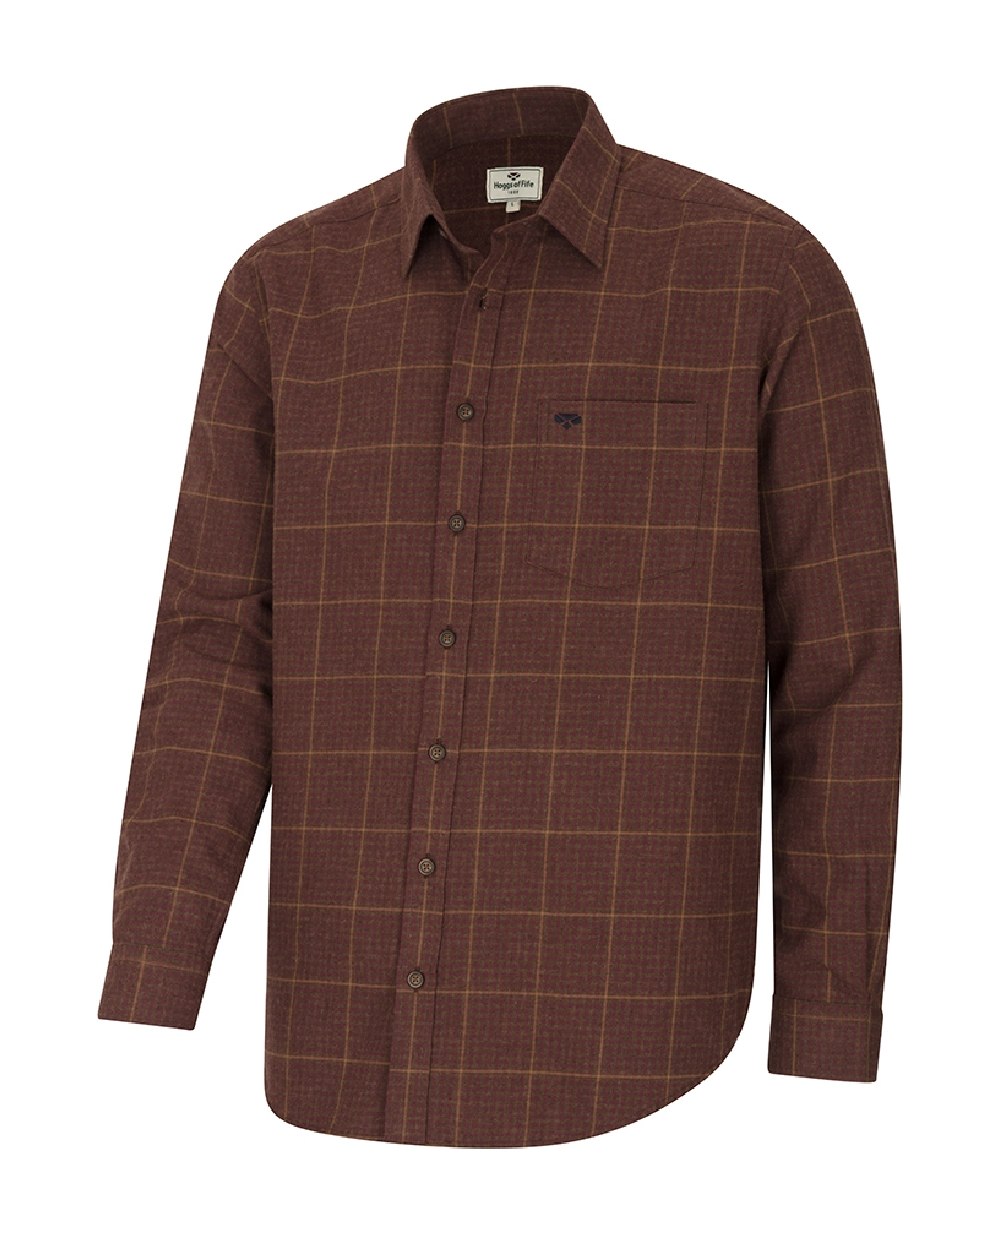 Rust coloured Hoggs of Fife Harris Cotton Wool Twill Check Shirt on white background 